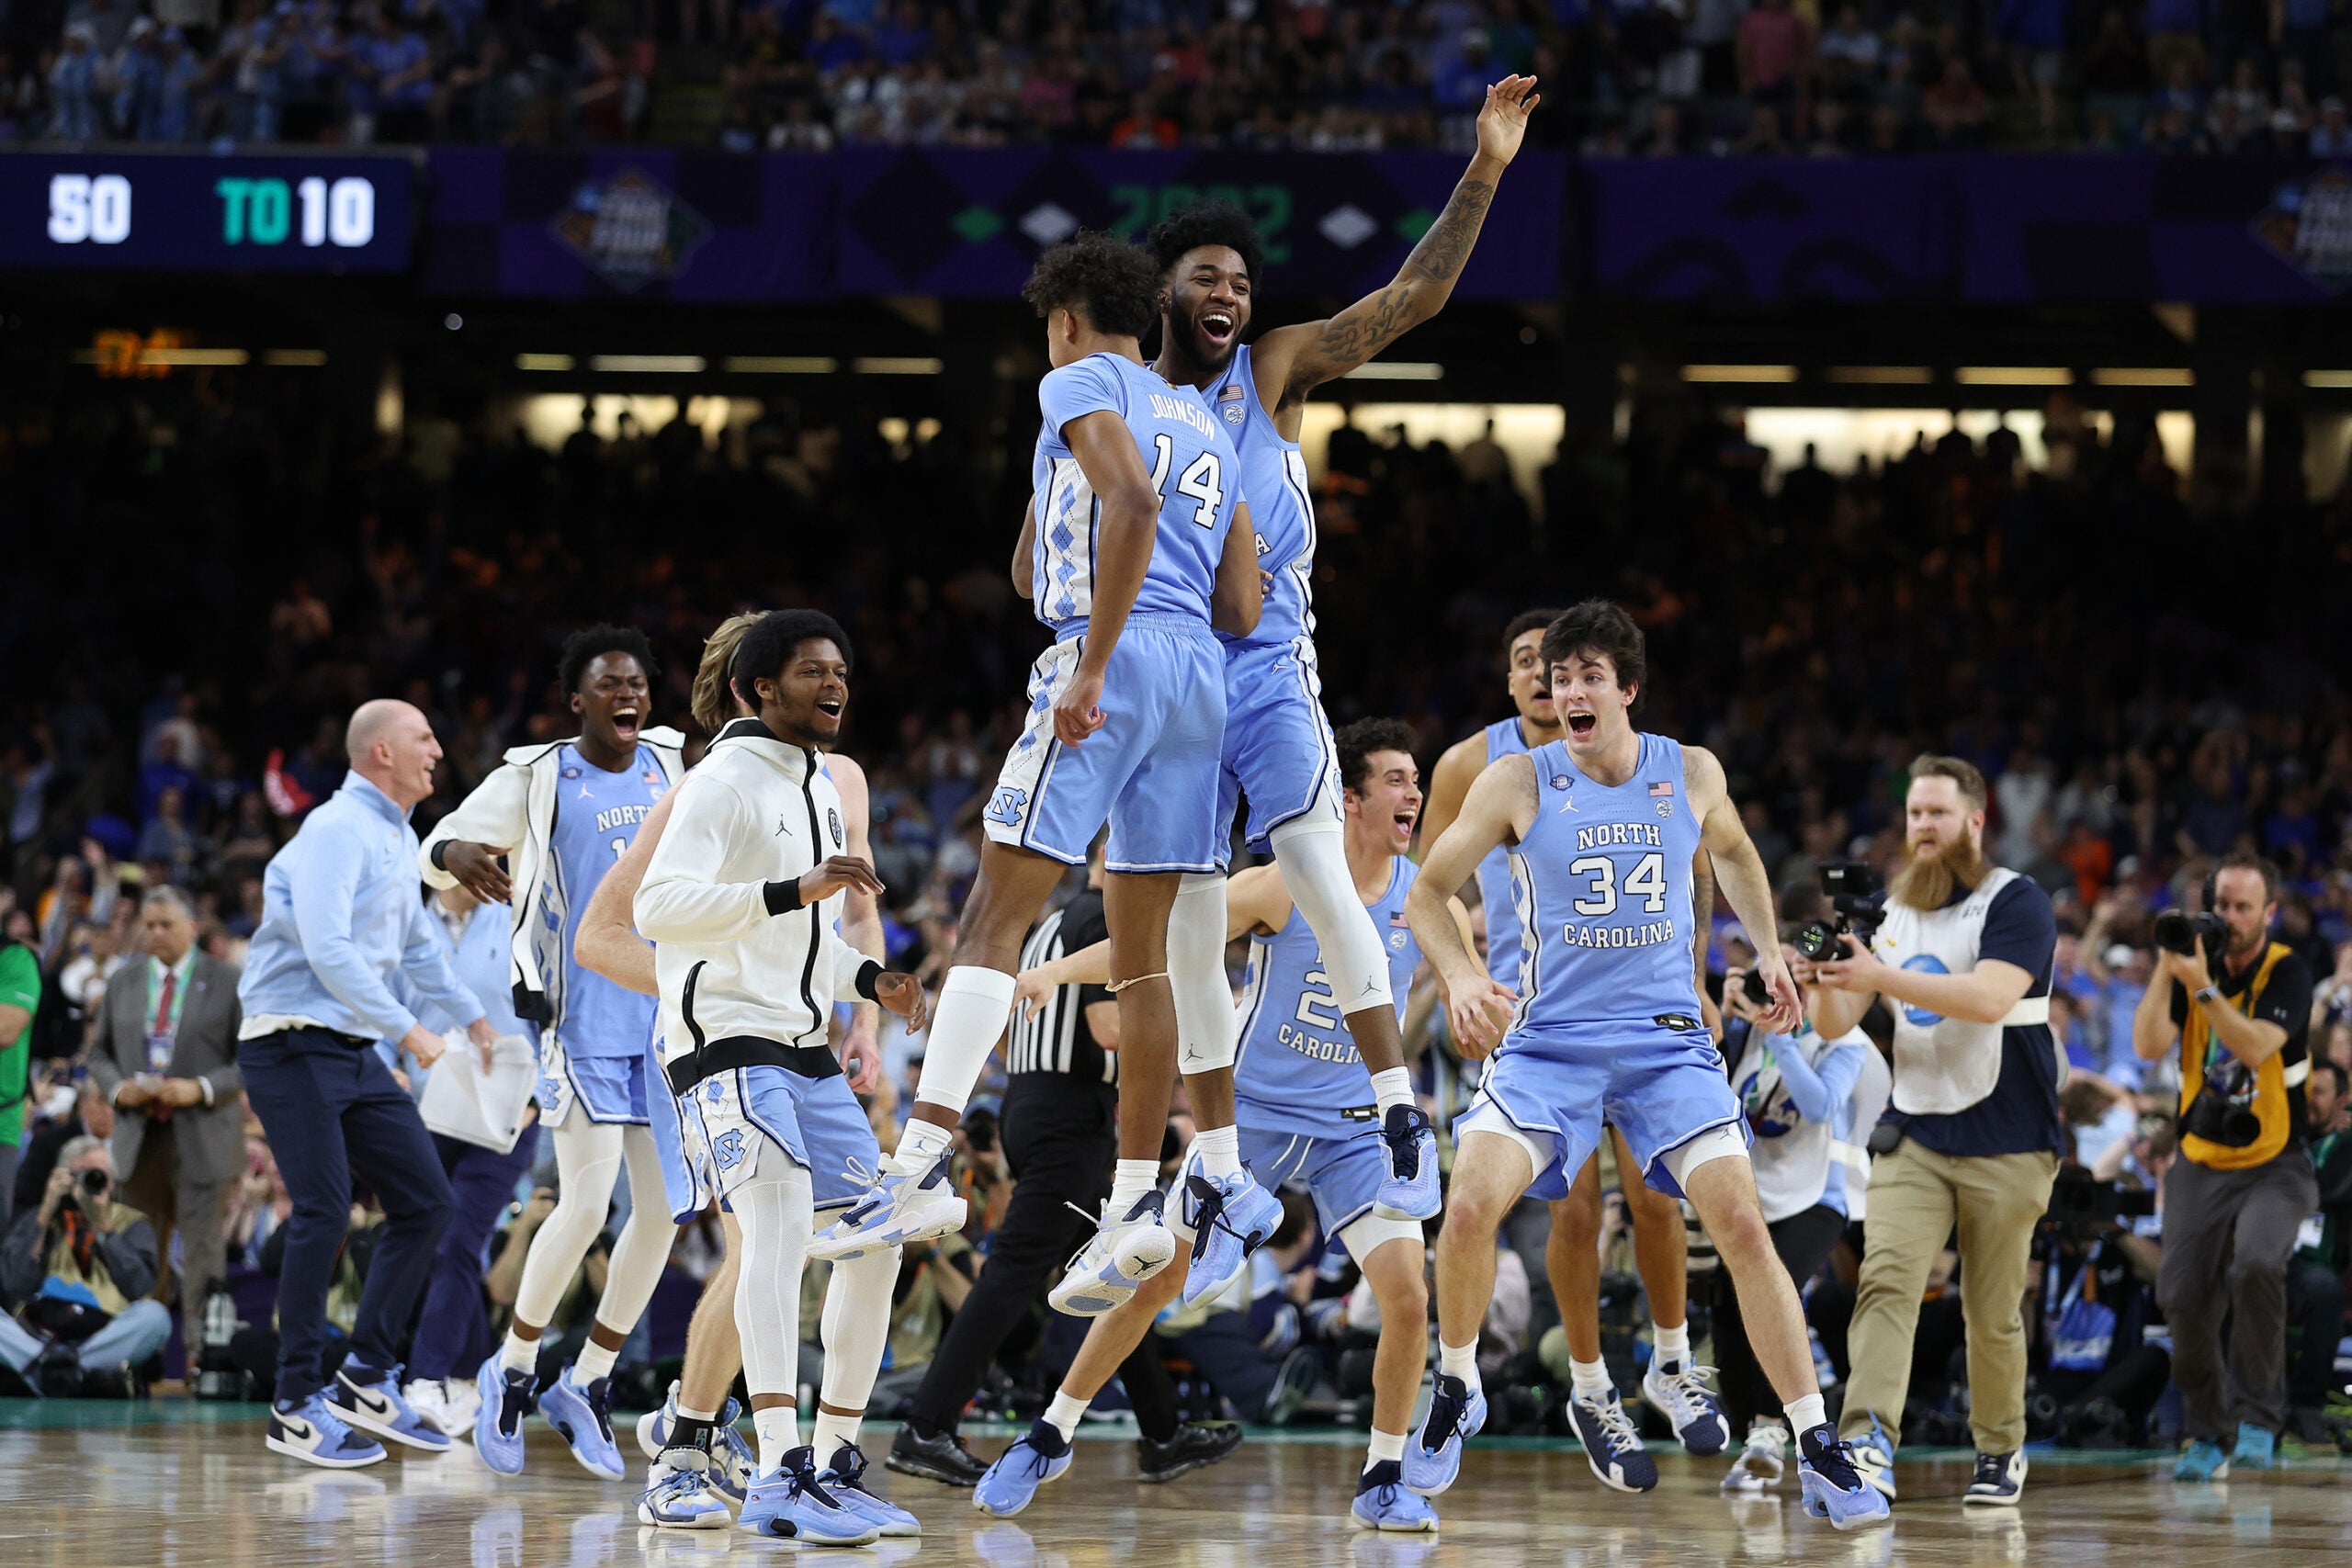 Puff Johnson #14 and Dontrez Styles #3 of the North Carolina Tar Heels react after defeating the Duke Blue Devils 81-77 in the second half of the game during the 2022 NCAA Men's Basketball Tournament Final Four semifinal.